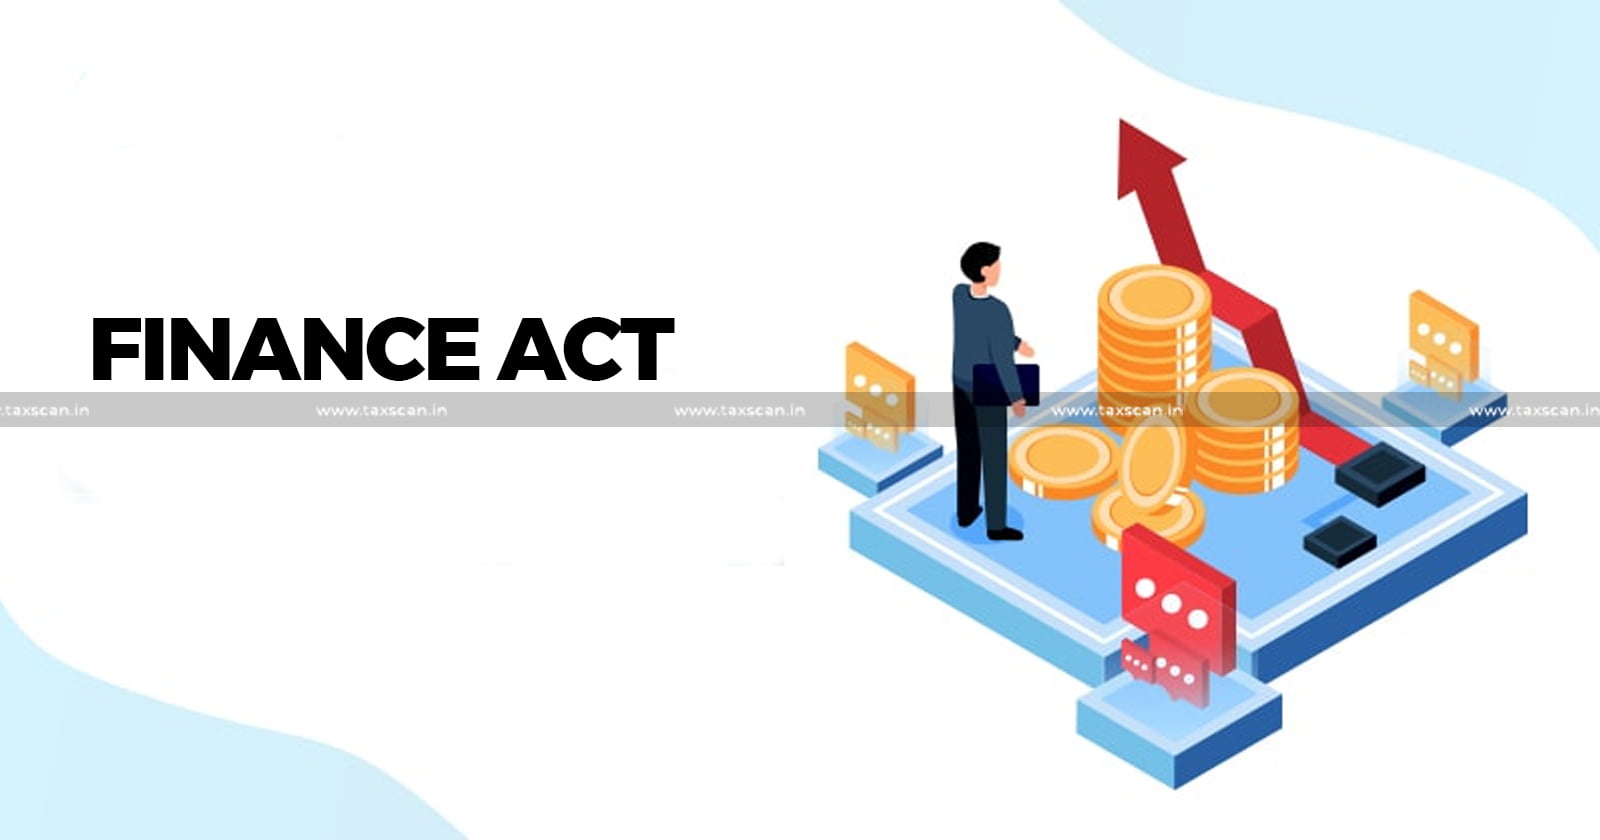 Taxation - Taxation and Other Laws - Taxation and Other Laws (Relaxation & Amendment of Certain Provisions) Act - Finance Act - Gujarat High Court - Re-Assessment Notices - Taxscan